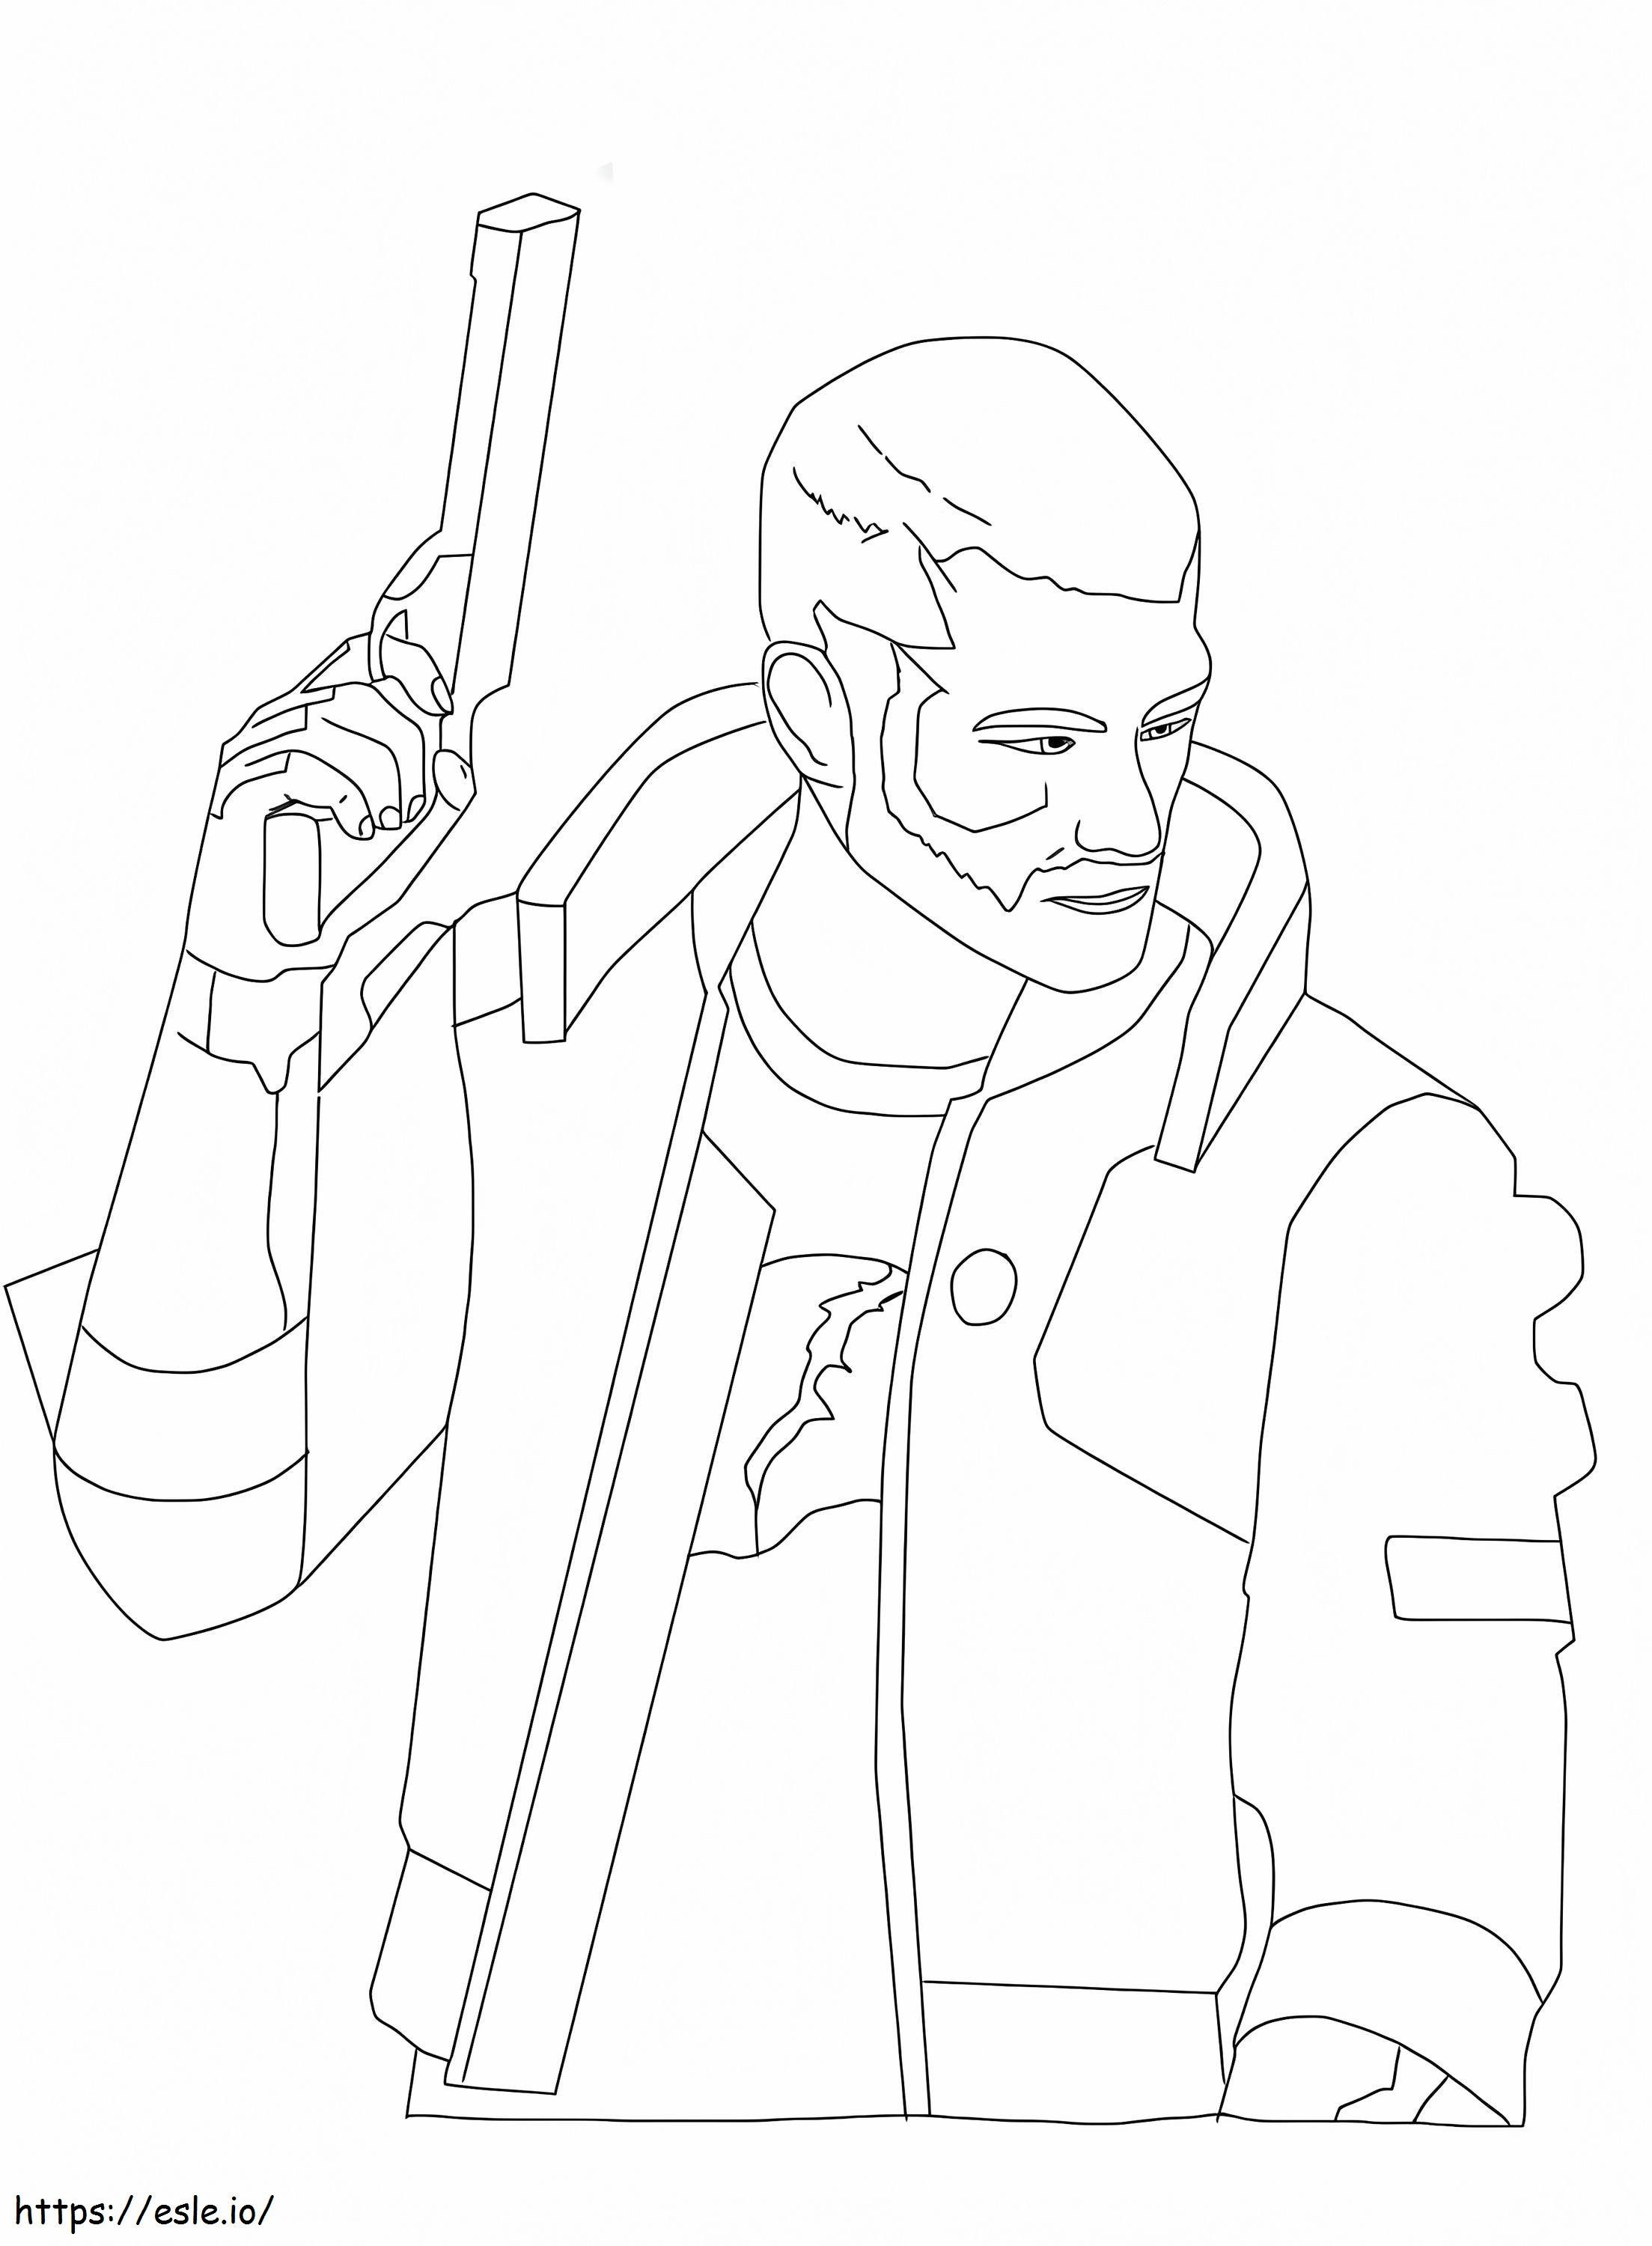 V Cyberpunk 2077 coloring page